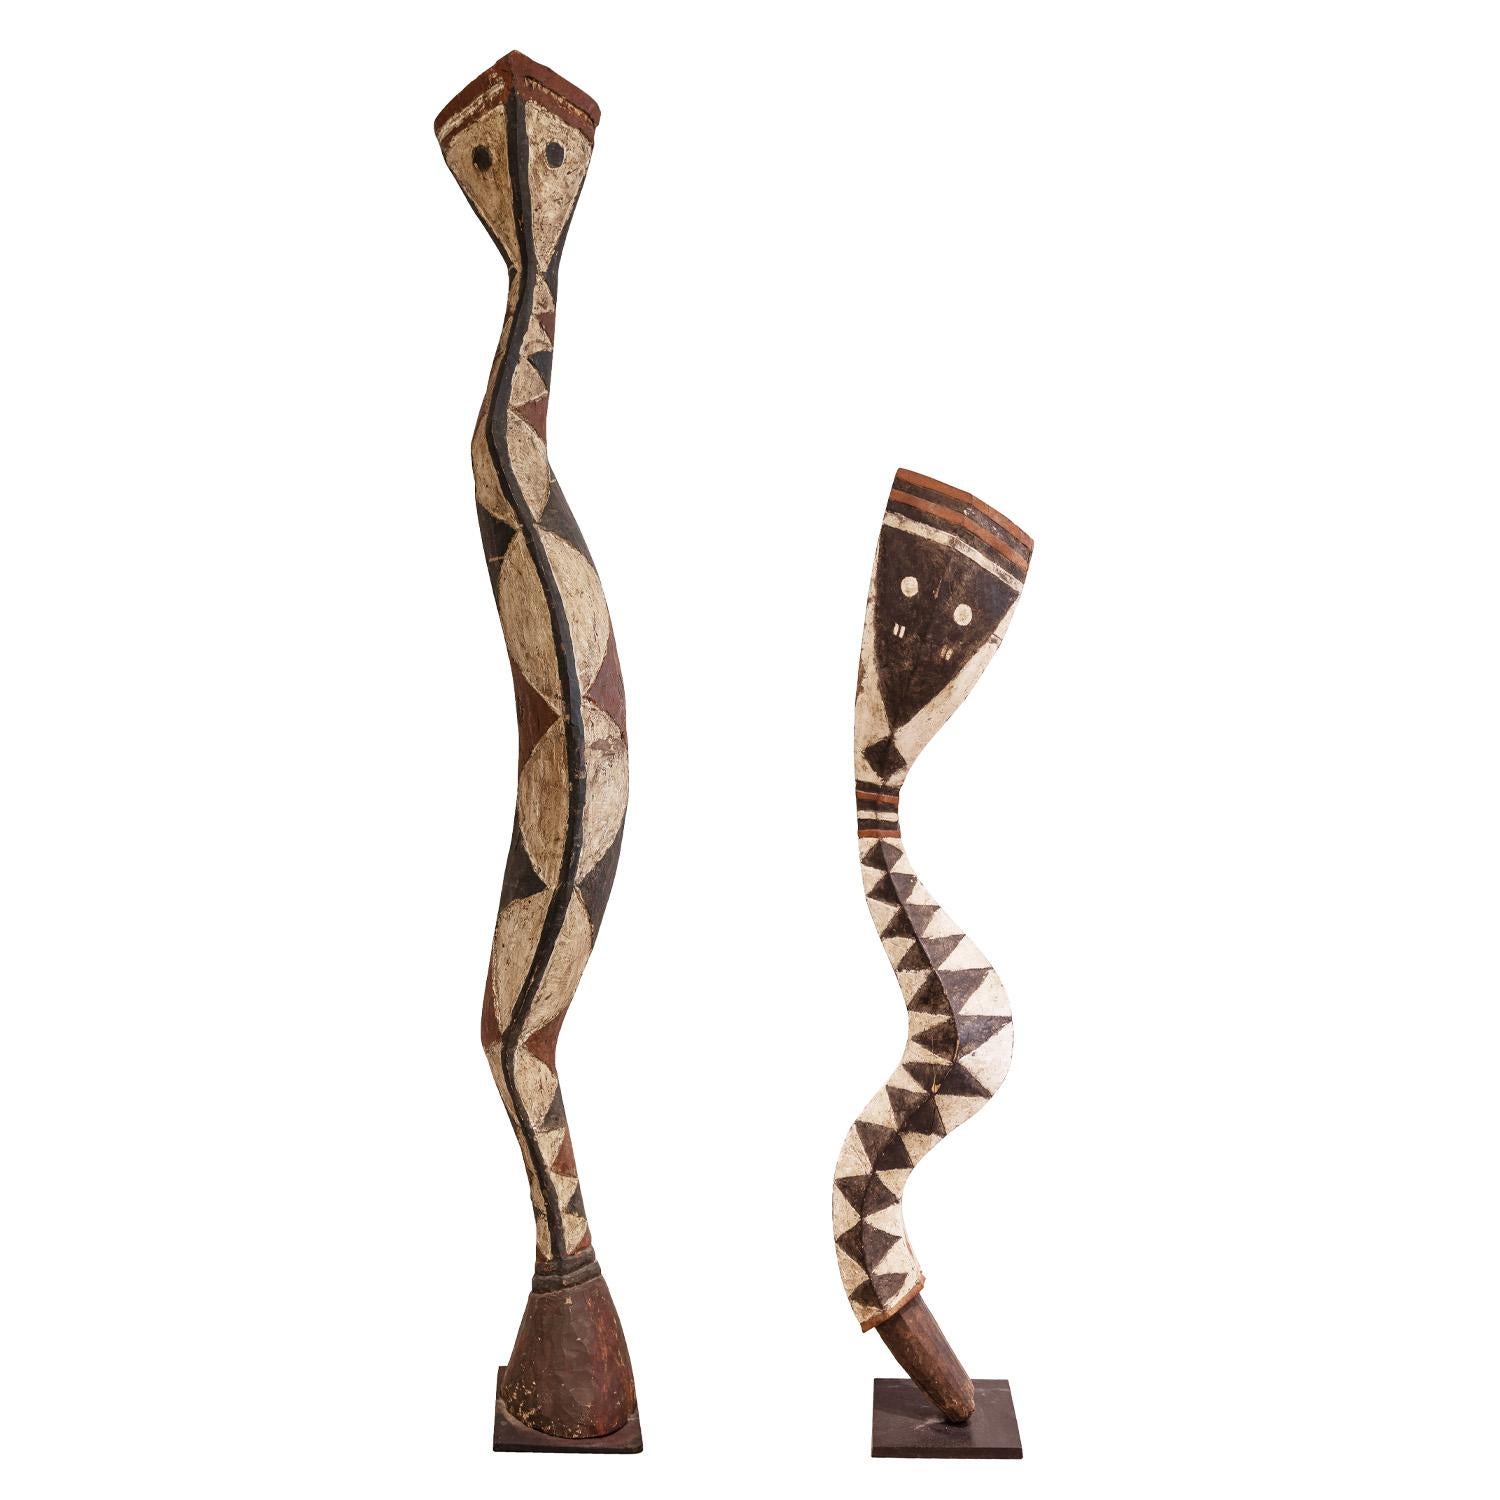 Pair of Serpent Headdresses (A-MANTSHO-NA-TSHOL) in carved wood with pigment by Baga artists, Guinea, Africa, early-20th century. From the Casamance region of Senegal to that of the Fouta Djallon in northern Guinea, the supreme manifesation of